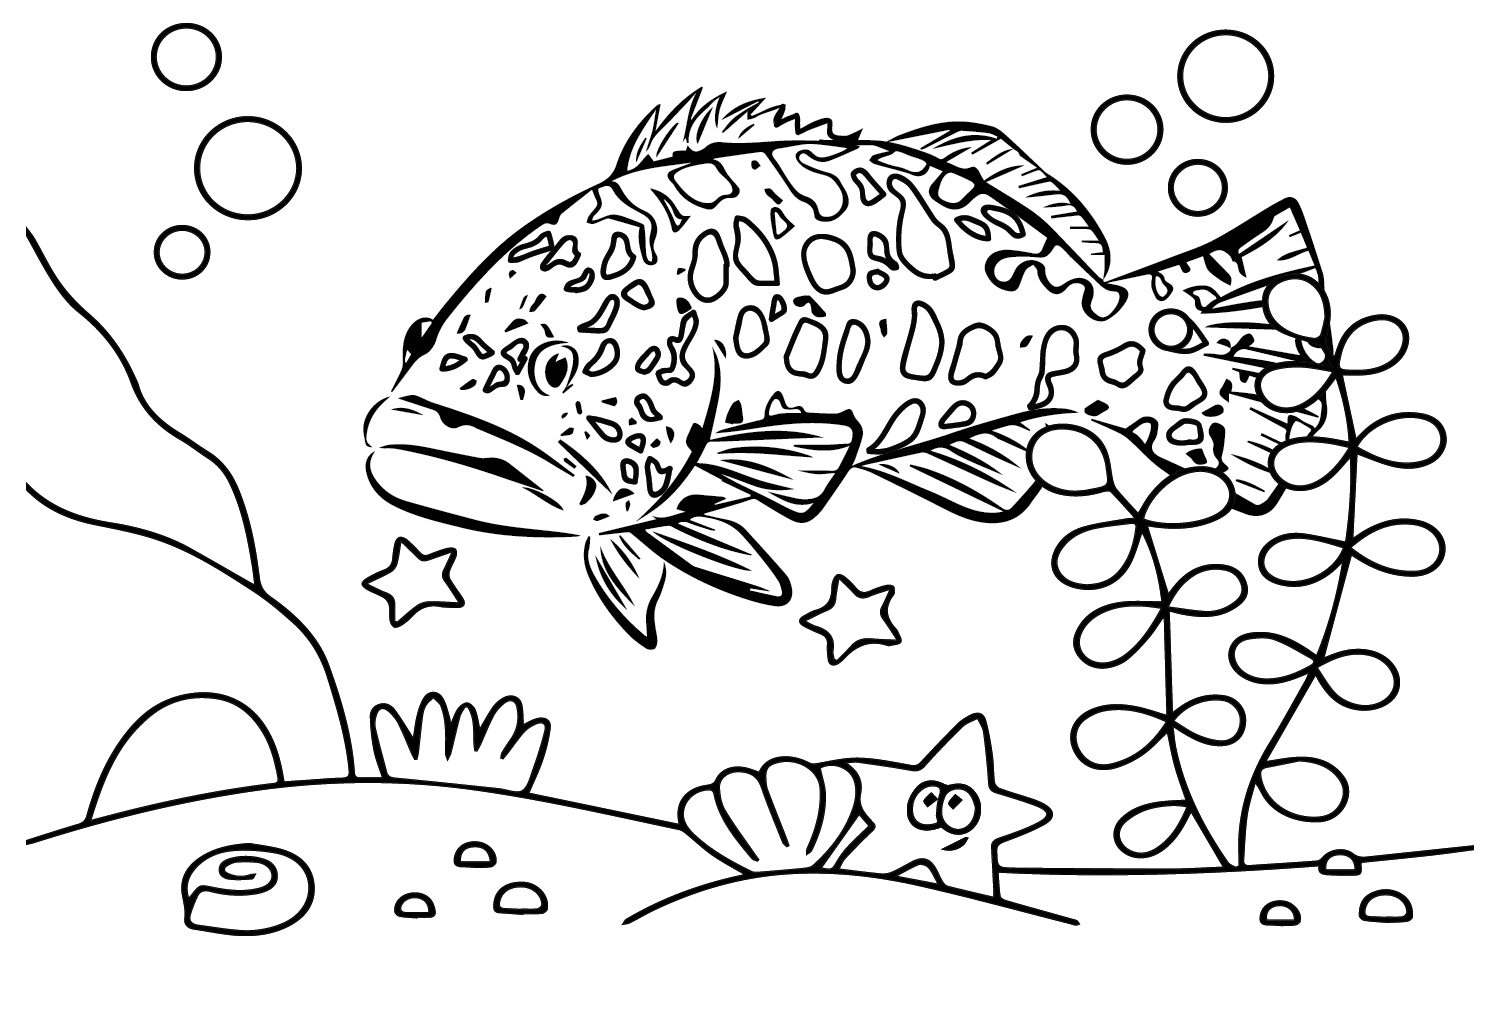 Grouper to Color from Grouper